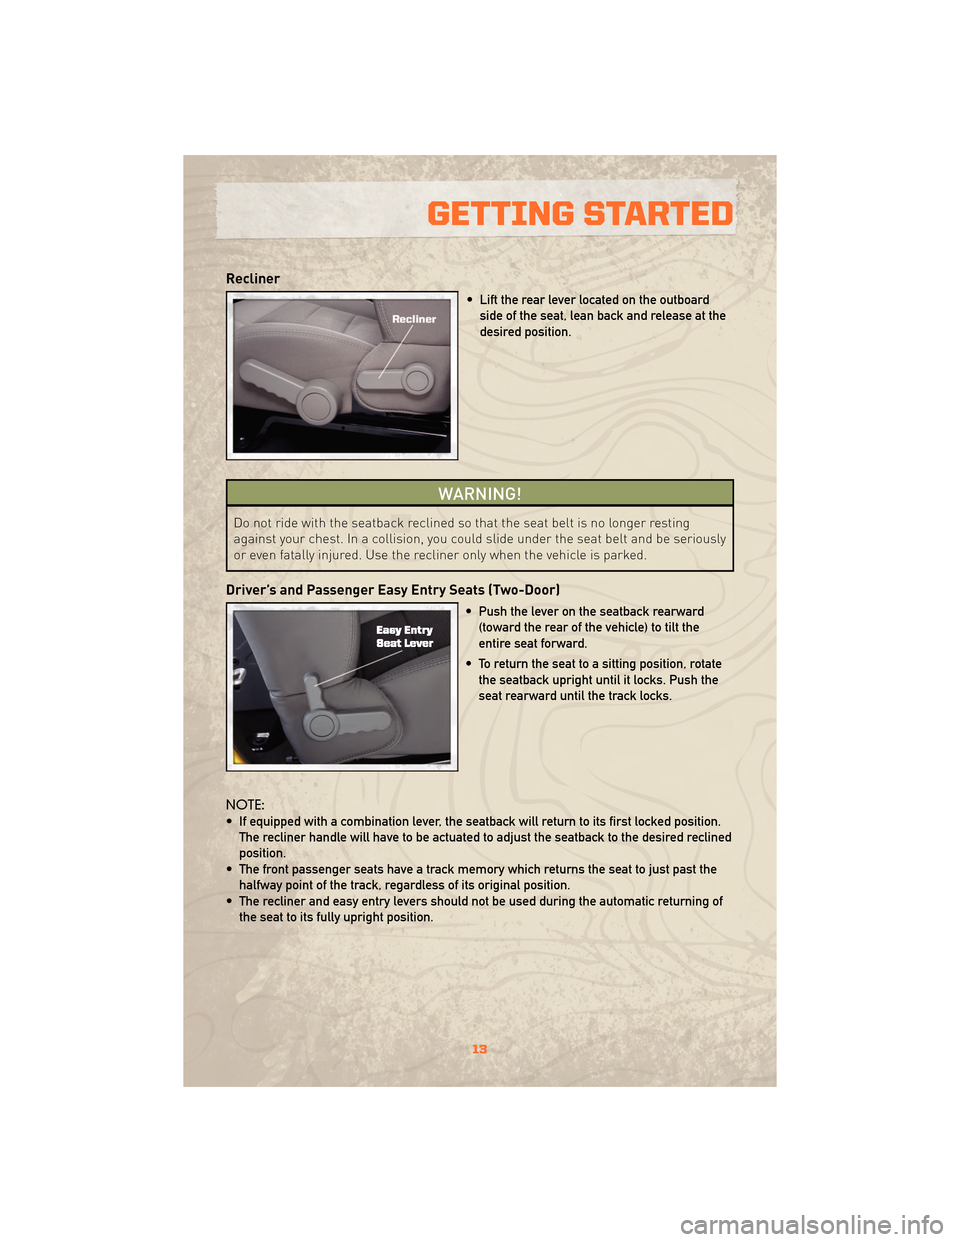 JEEP WRANGLER 2010 JK / 3.G User Guide Recliner
• Lift the rear lever located on the outboardside of the seat, lean back and release at the
desired position.
WARNING!
Do not ride with the seatback reclined so that the seat belt is no lon